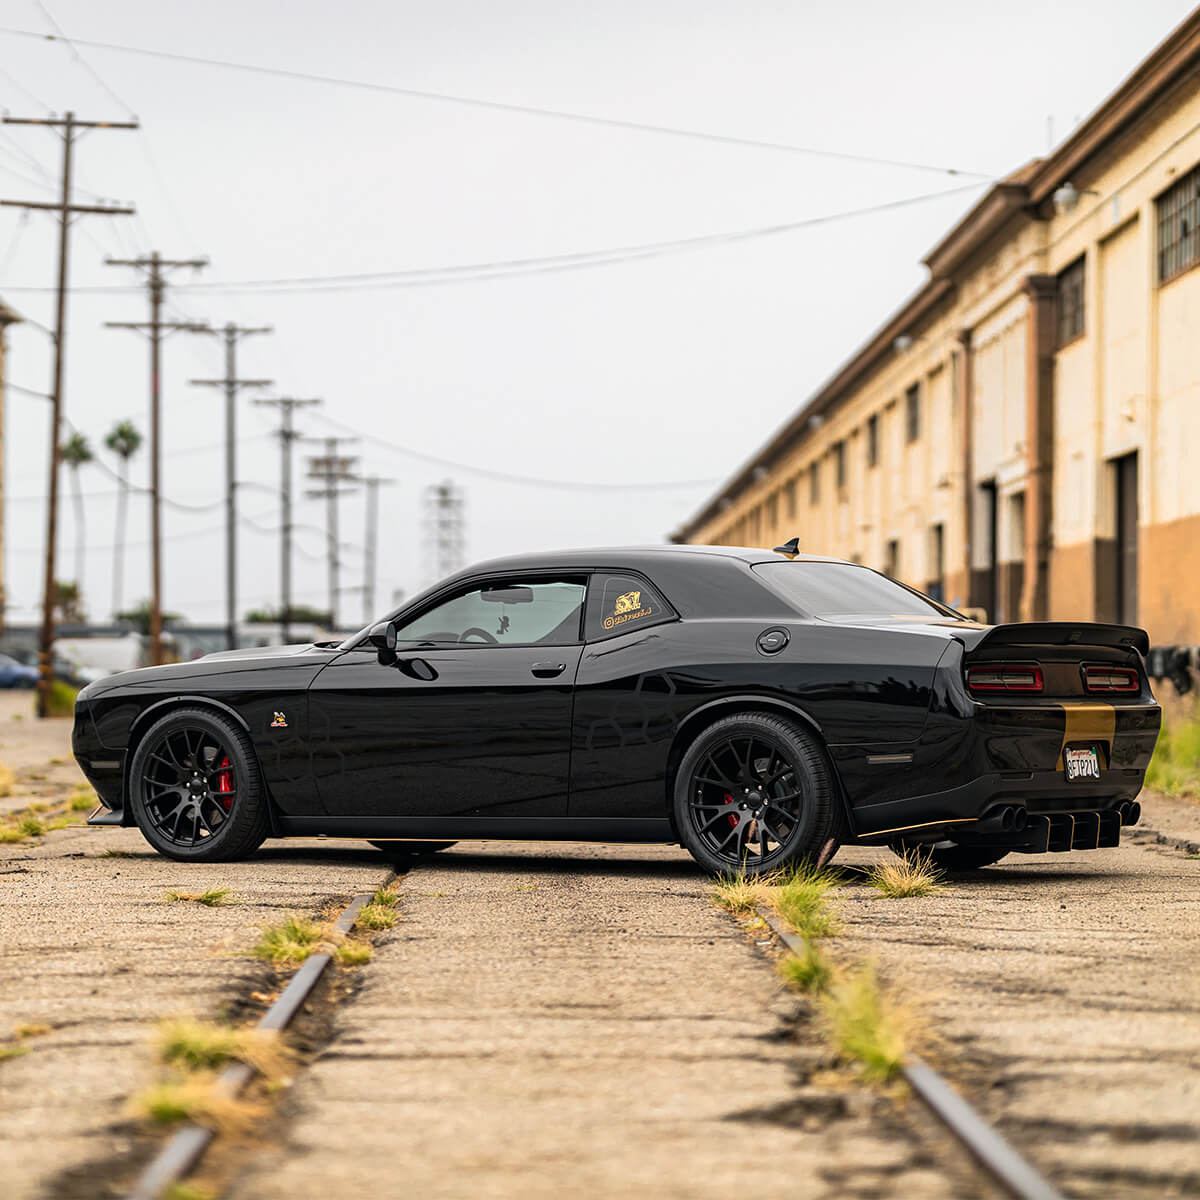 Dodge Challenger black with gold accents